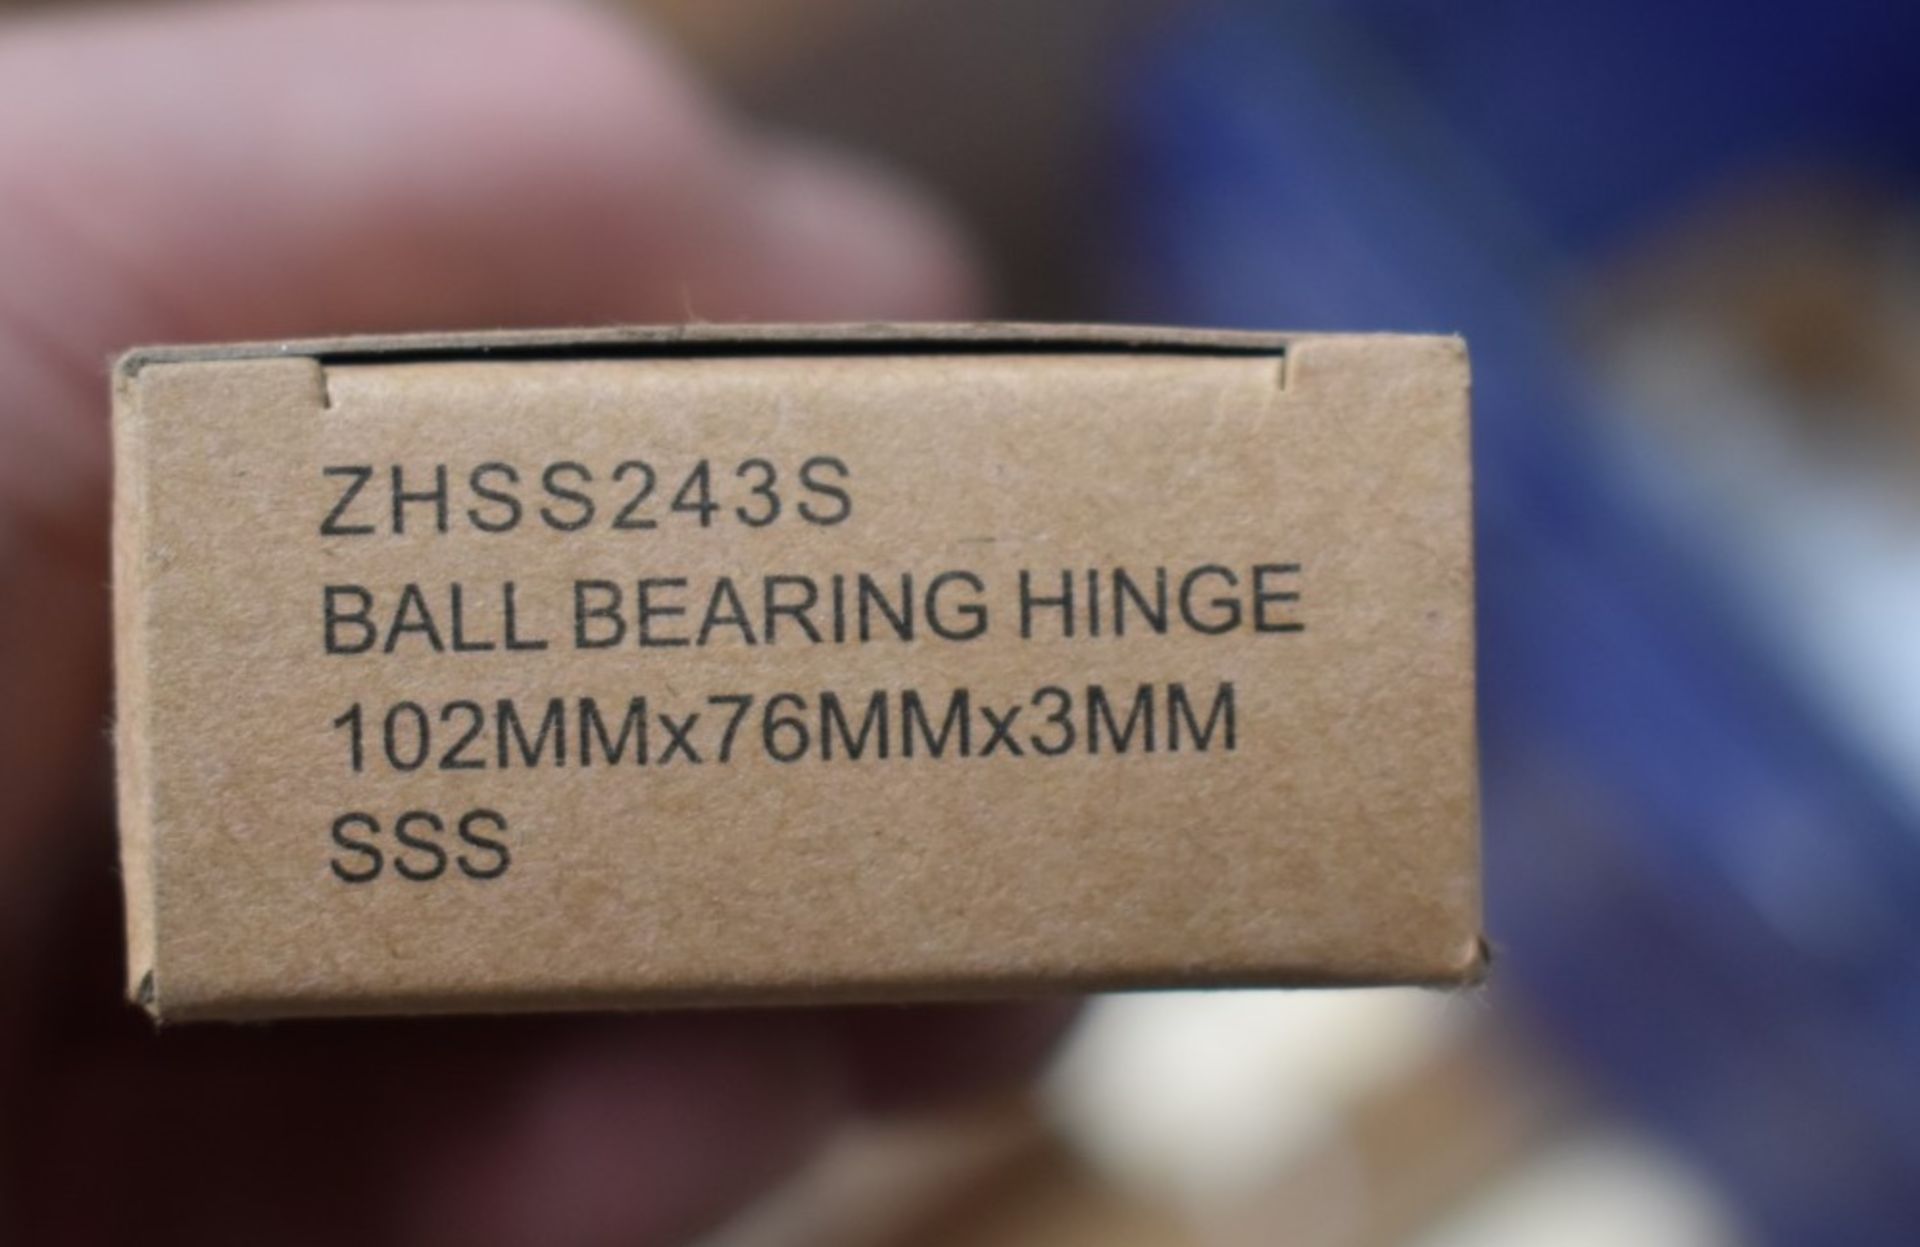 Approximately 90 x Assorted Boxes of Hinges - Brands Include Carlisle Brass, Zoo, Enduro and Eclipse - Image 14 of 19